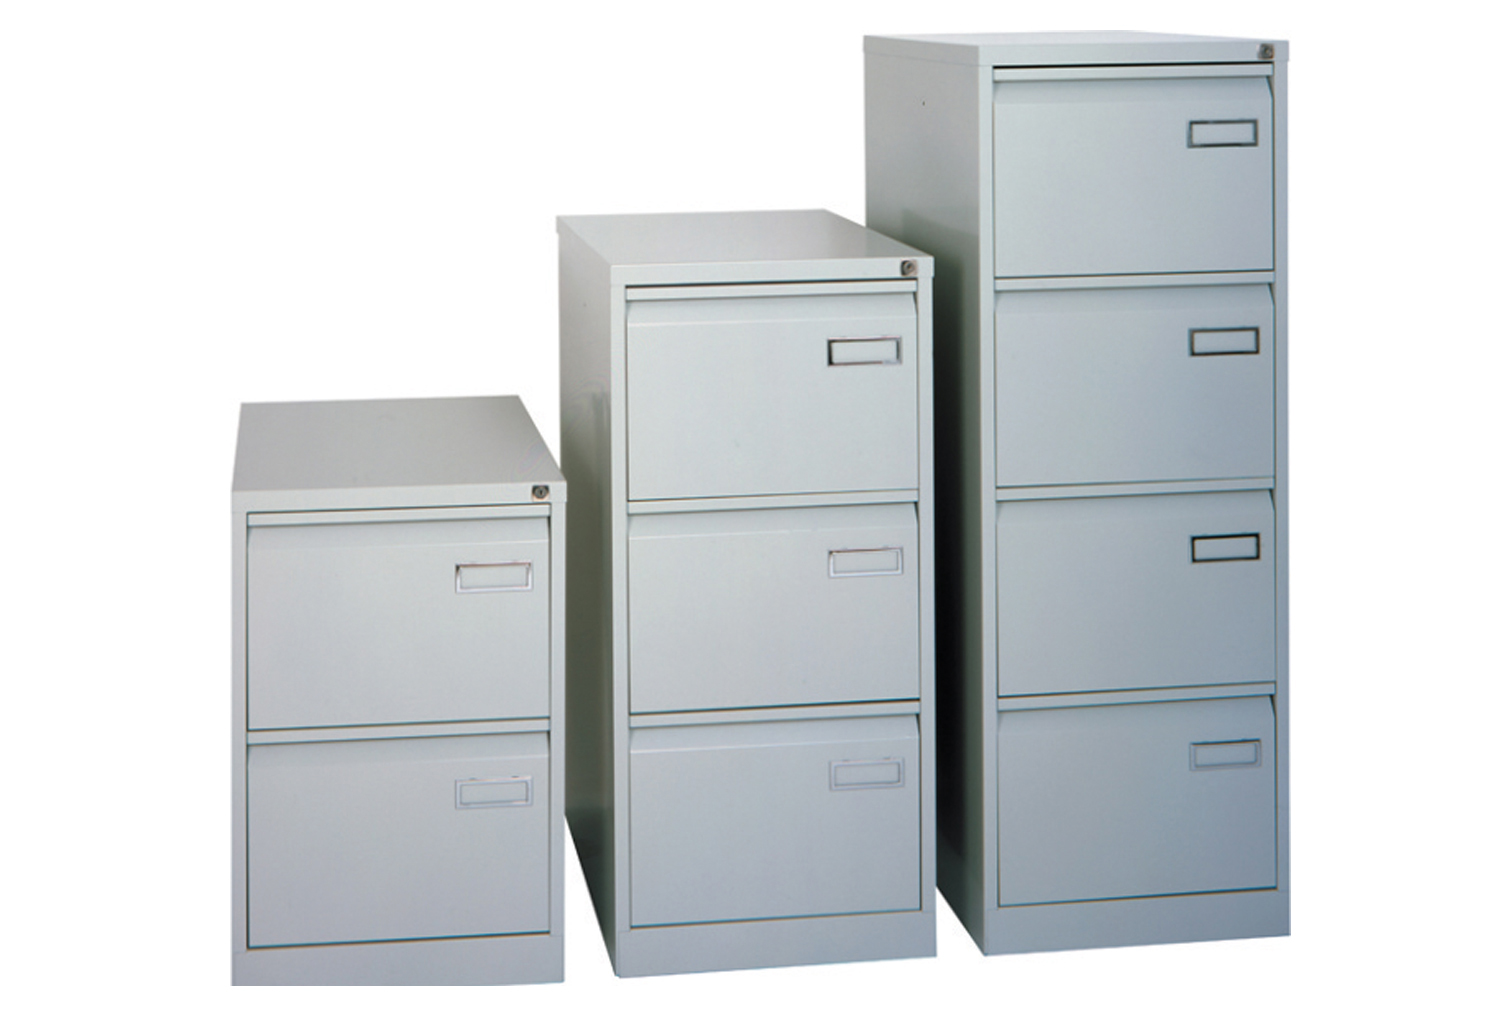 Bisley Executive PSF Filing Cabinet, 3 Drawer - 47wx62dx102h (cm), Silver